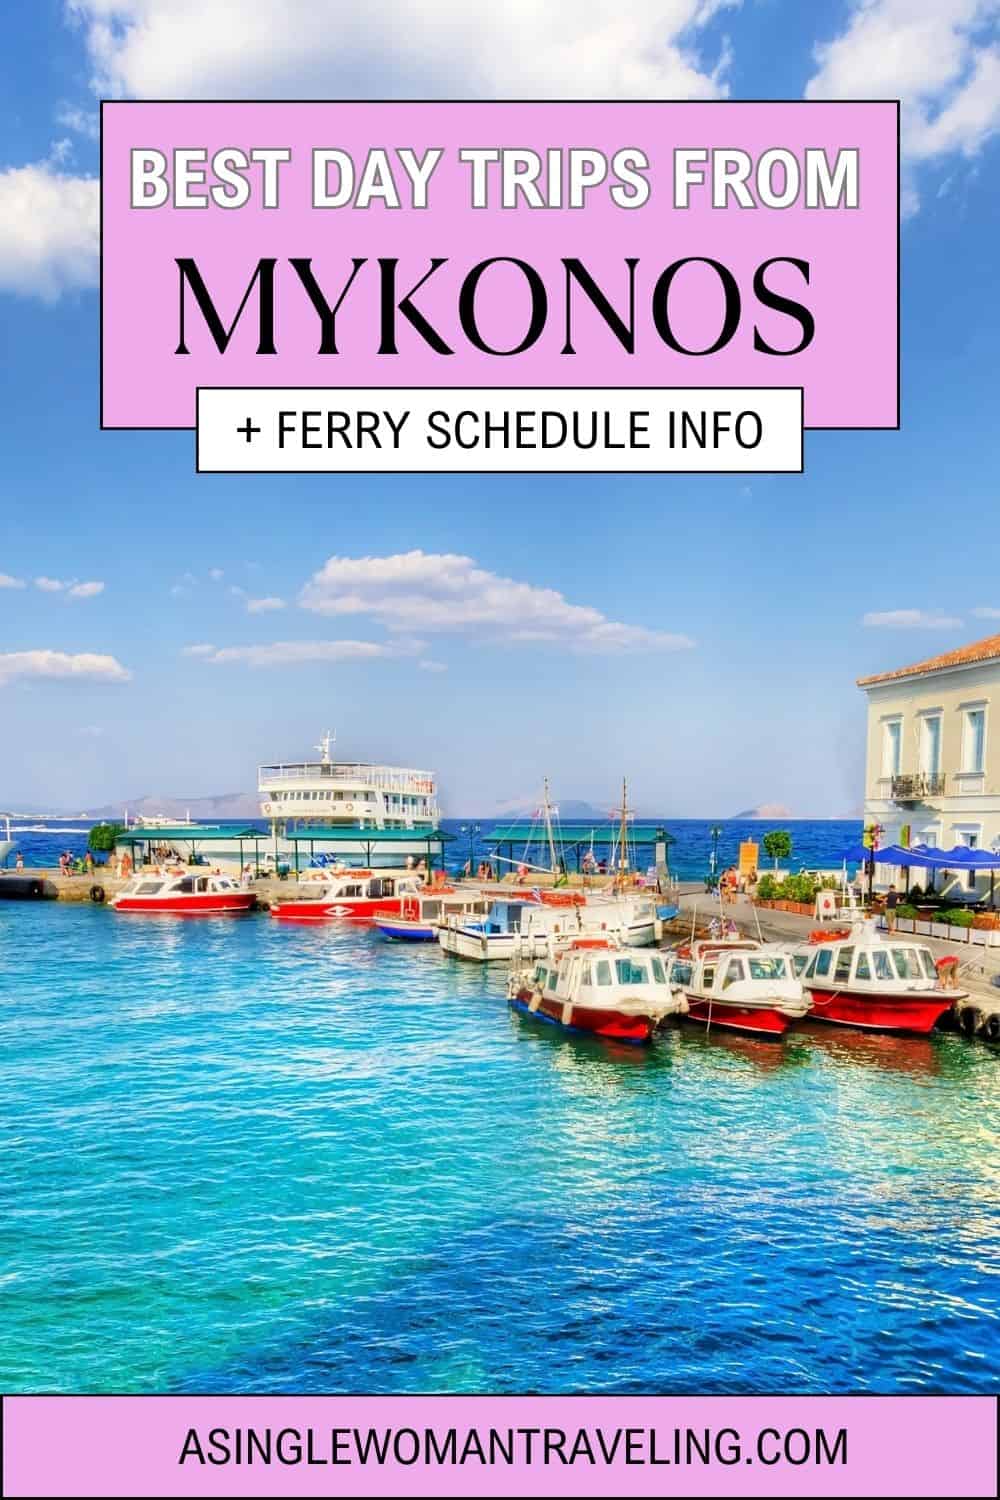 Promotional image for travel blog featuring the text 'Best Day Trips from MYKONOS + Ferry Schedule Info' over a vivid backdrop of Mykonos port with azure waters, a ferry, and small boats docked along a sunlit quayside